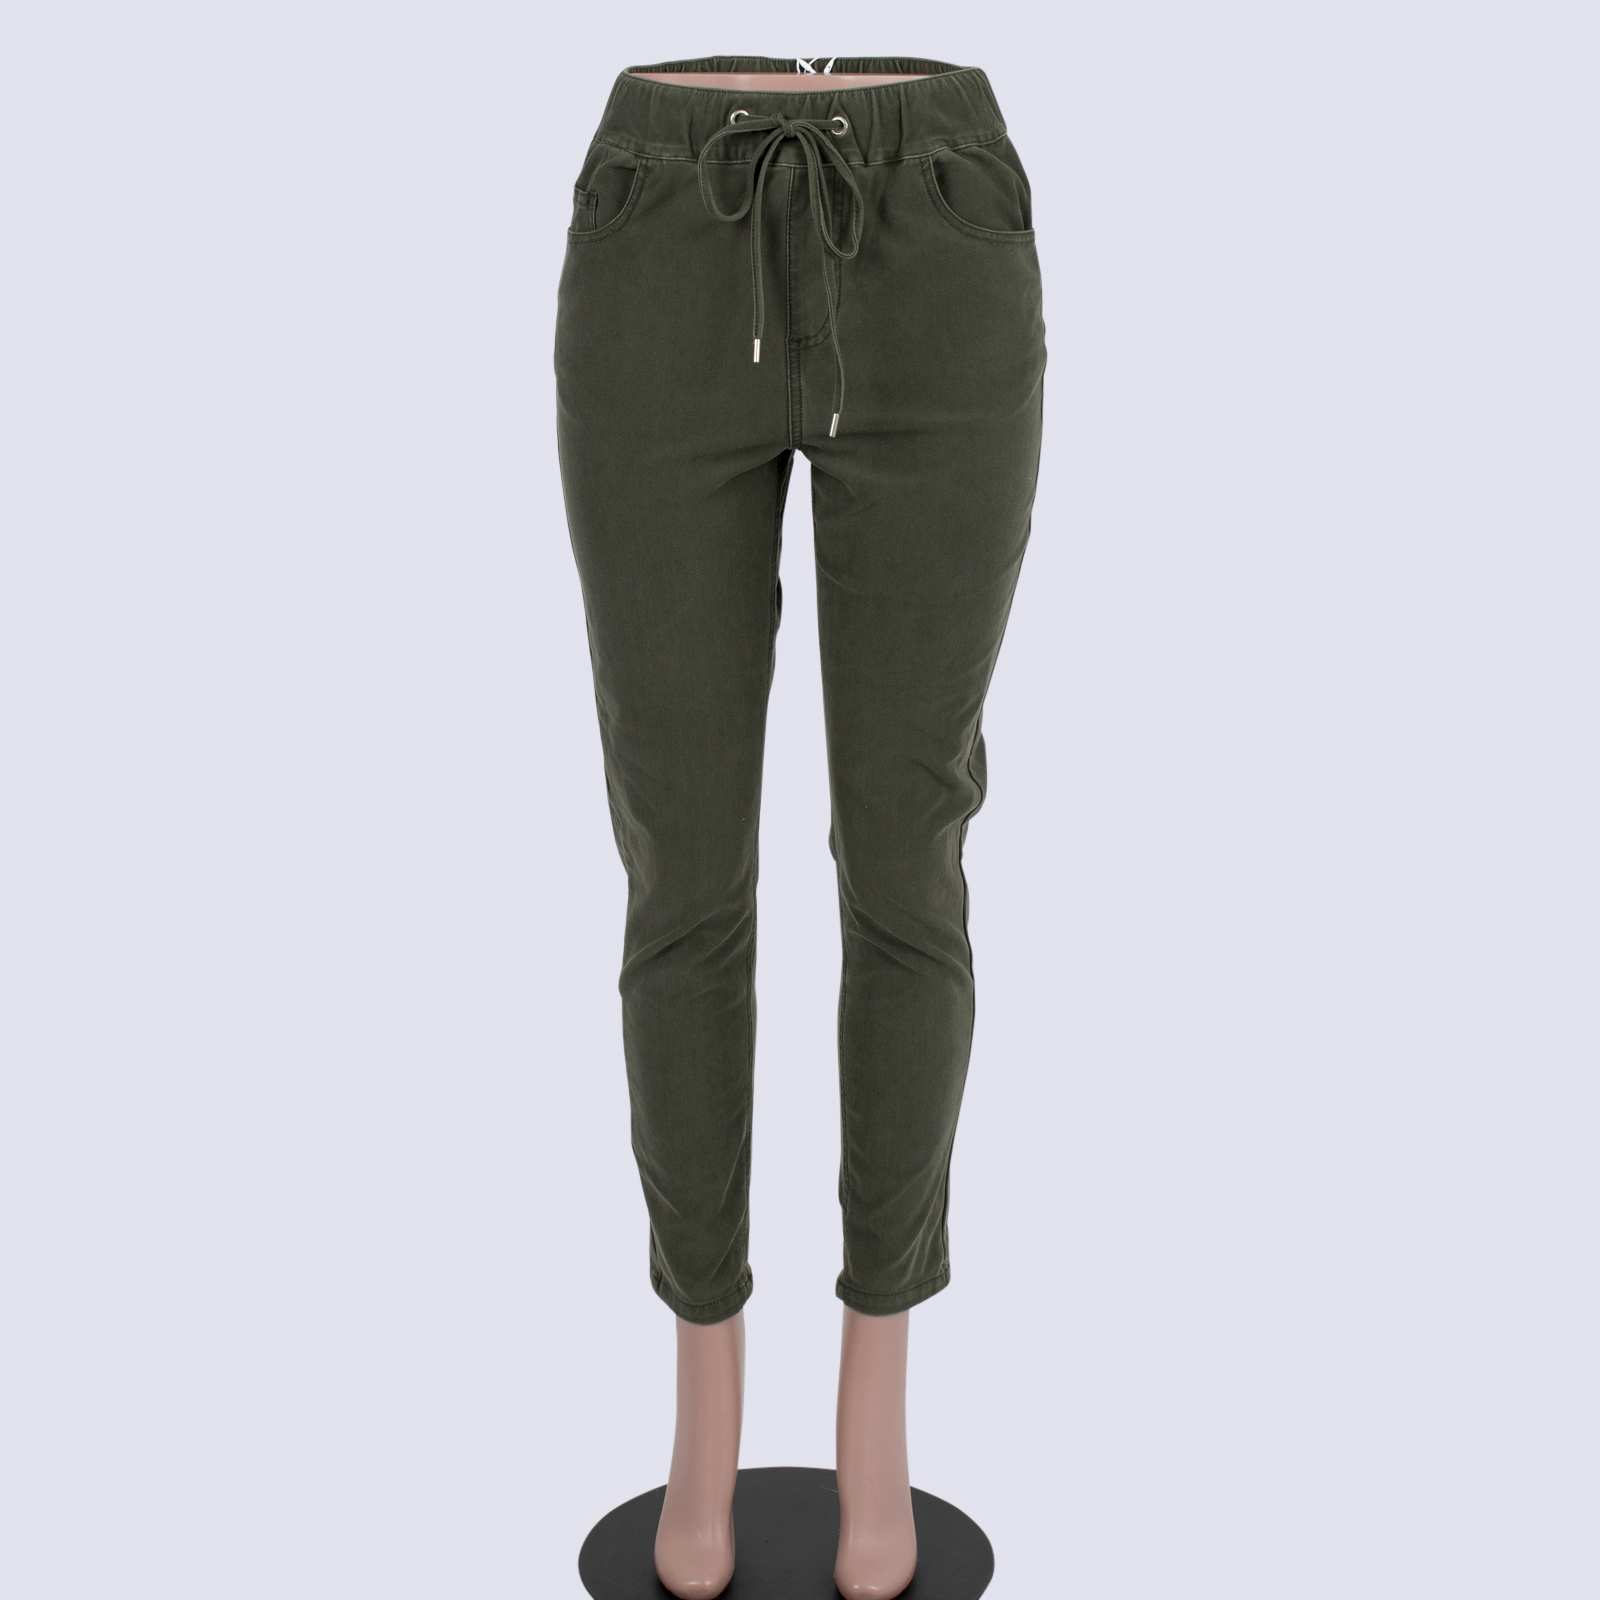 NWT French Connection Khaki Pull Up Jeans